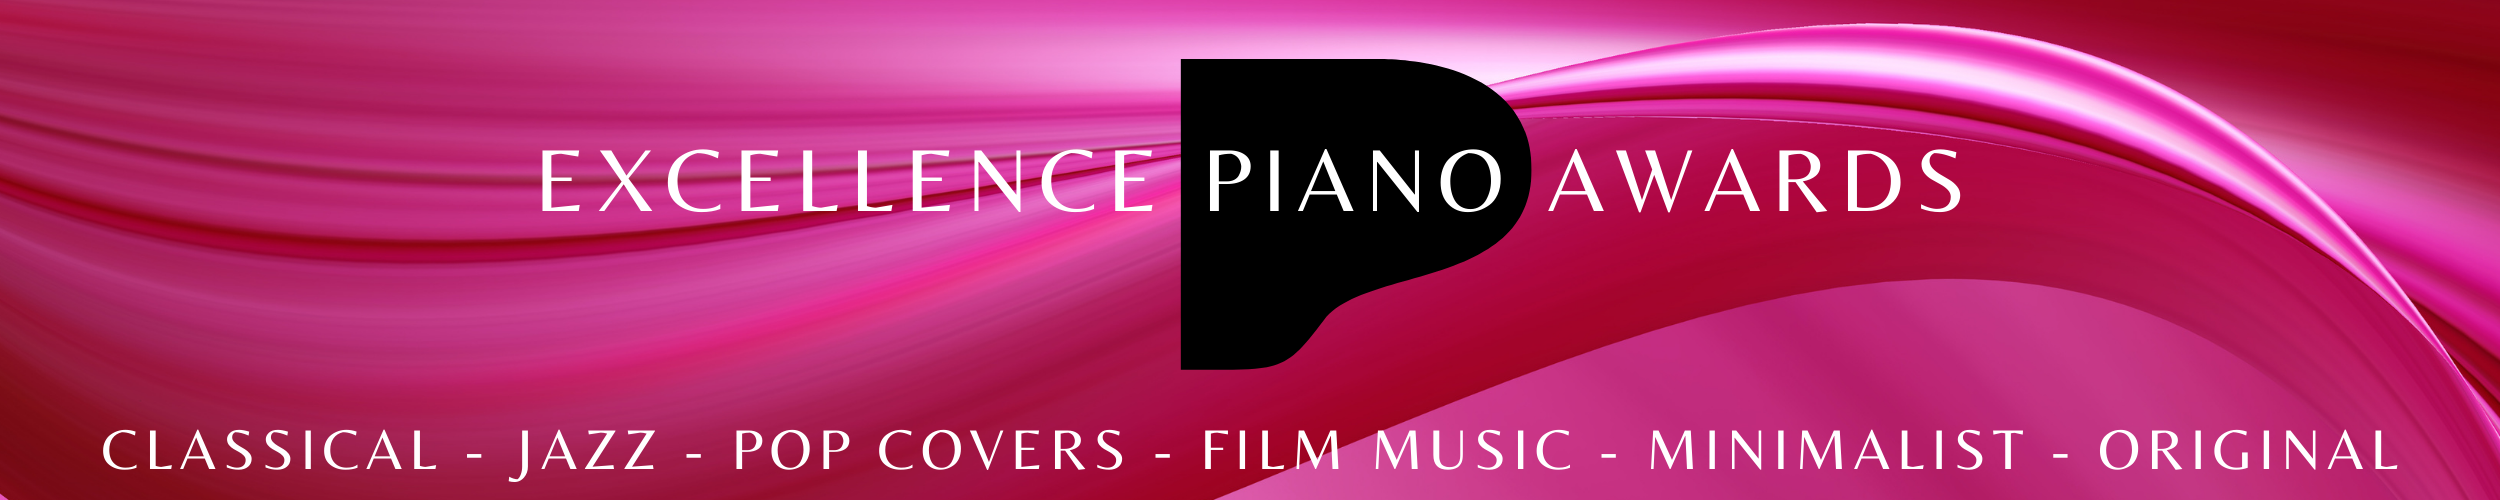 Excellence Piano Awards